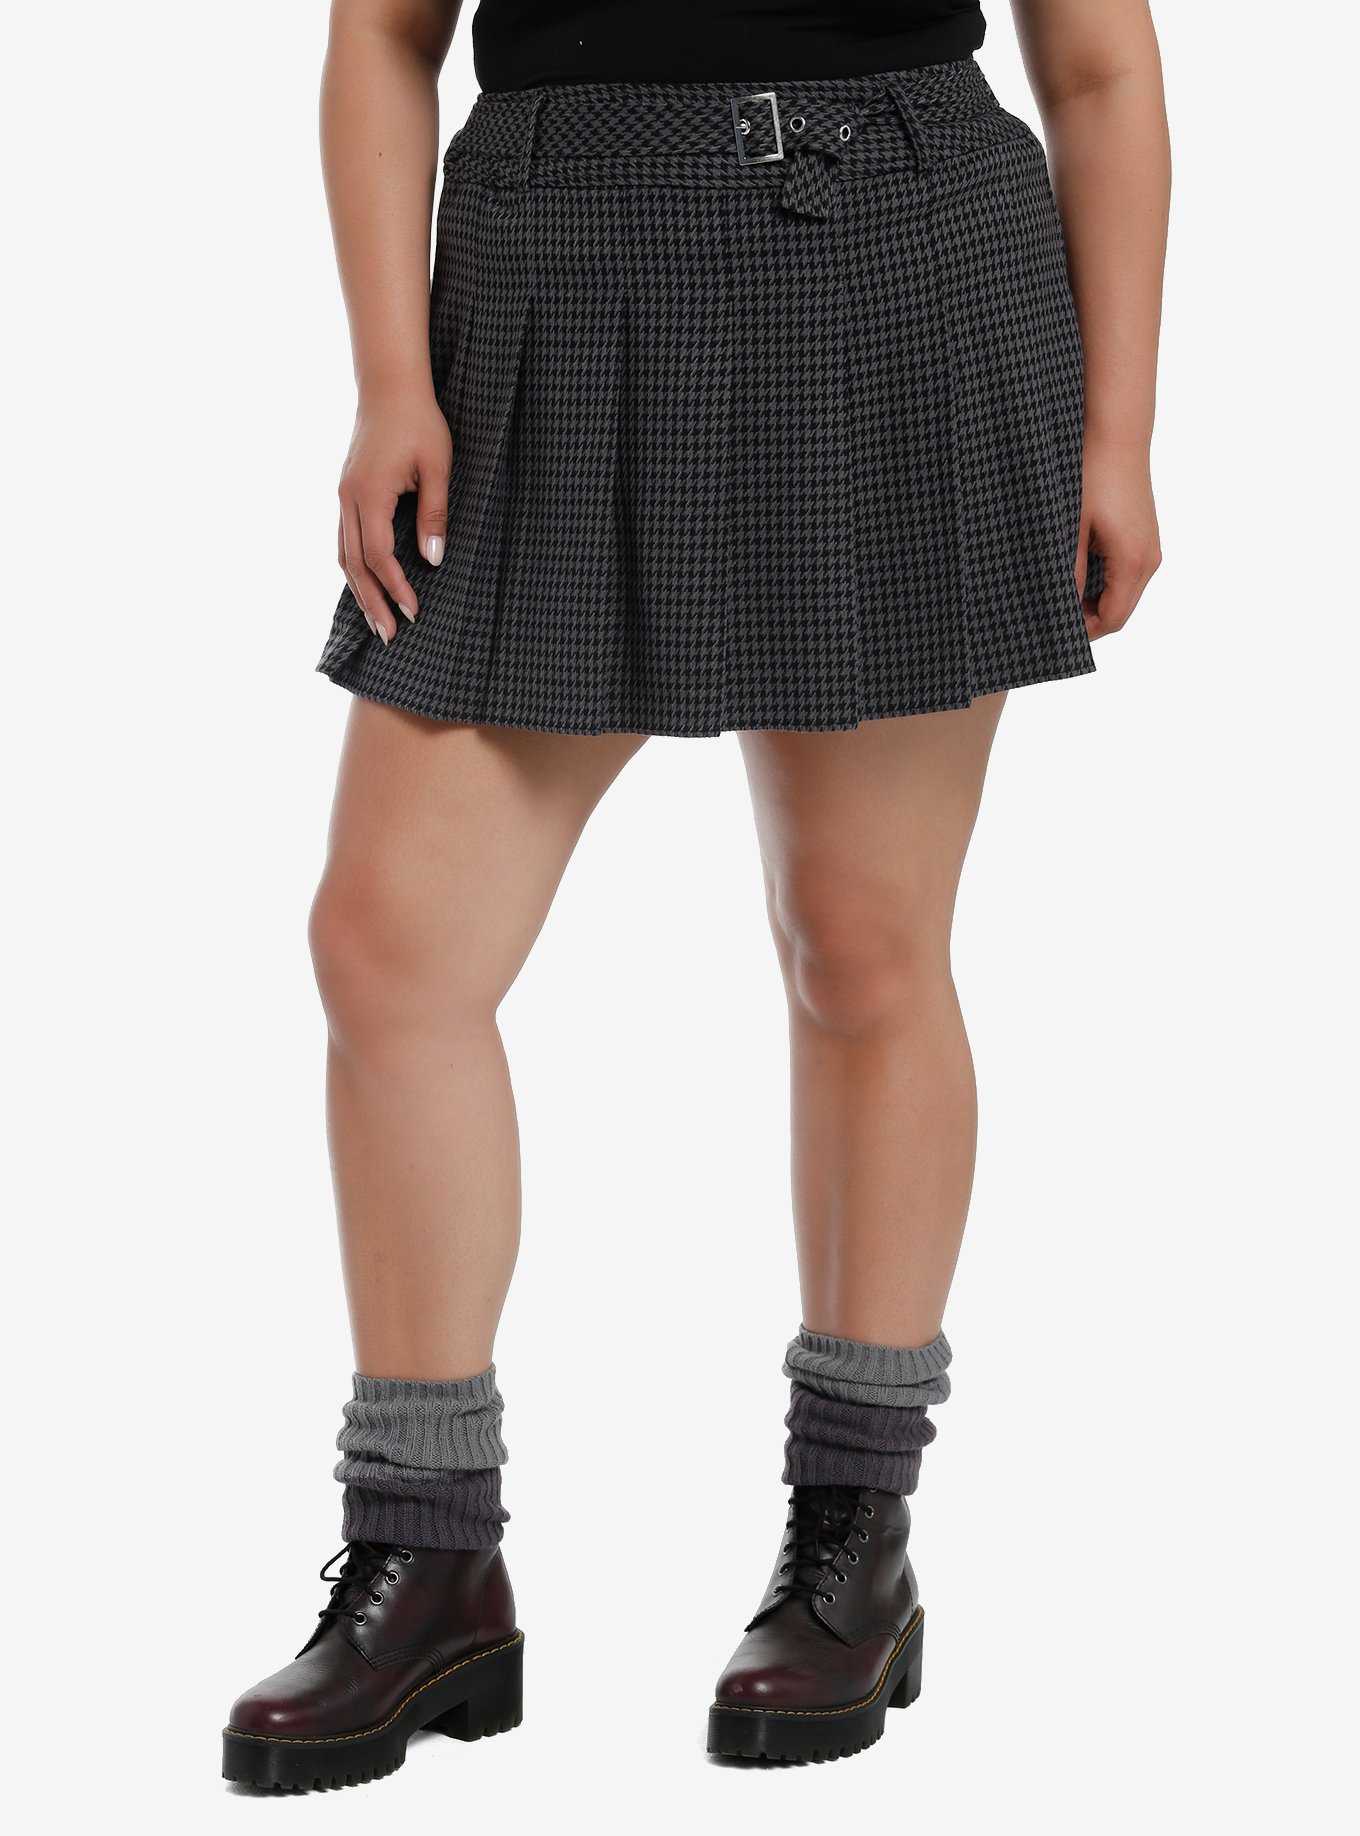 Social Collision Black & Grey Houndstooth Pleated Skirt Plus Size, , hi-res